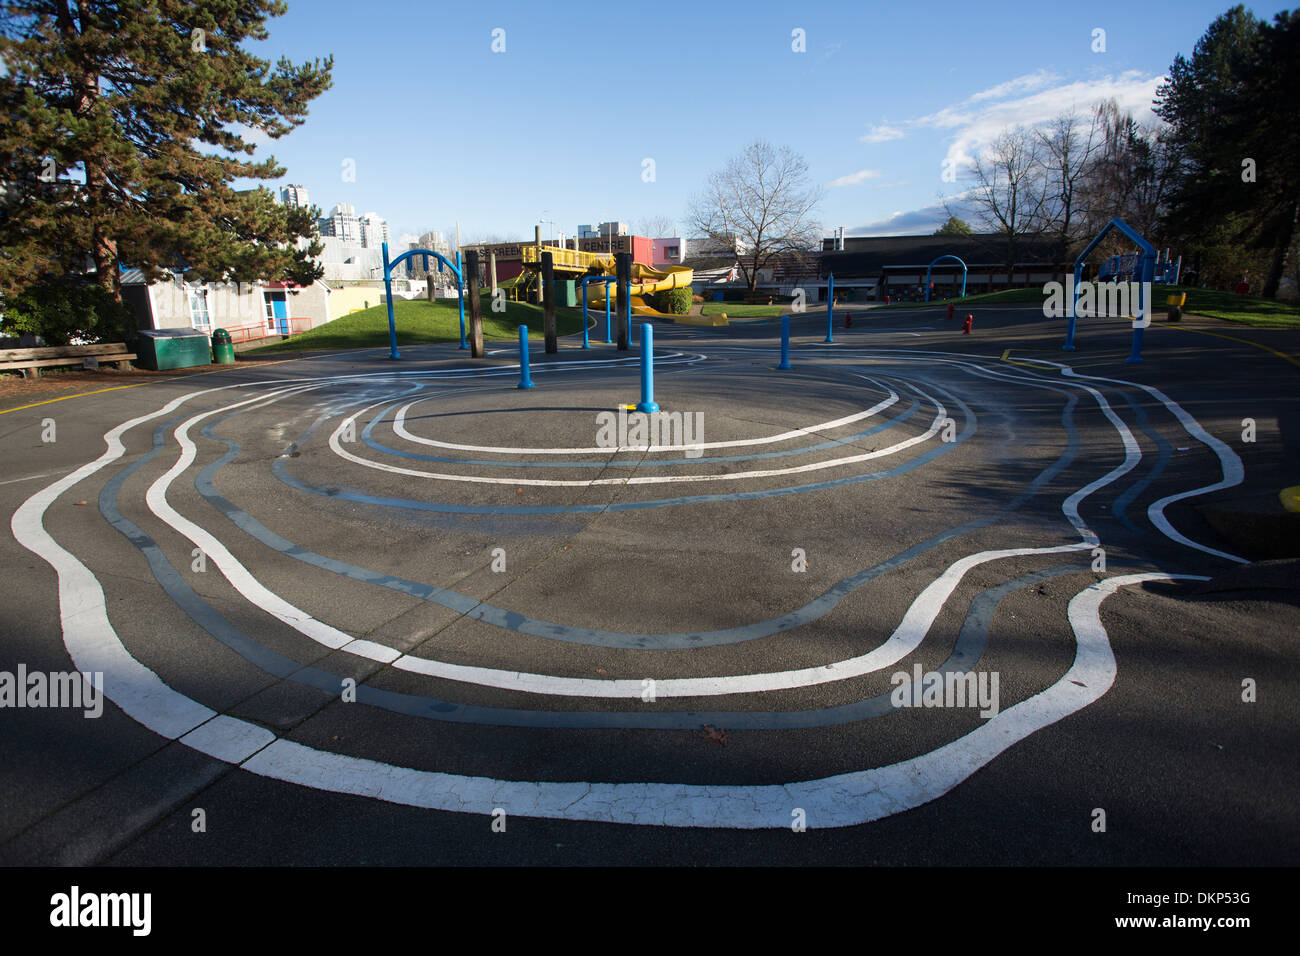 Playground with painted blue circles in False Creek, Vancouver, British Columbia, Canada. Stock Photo